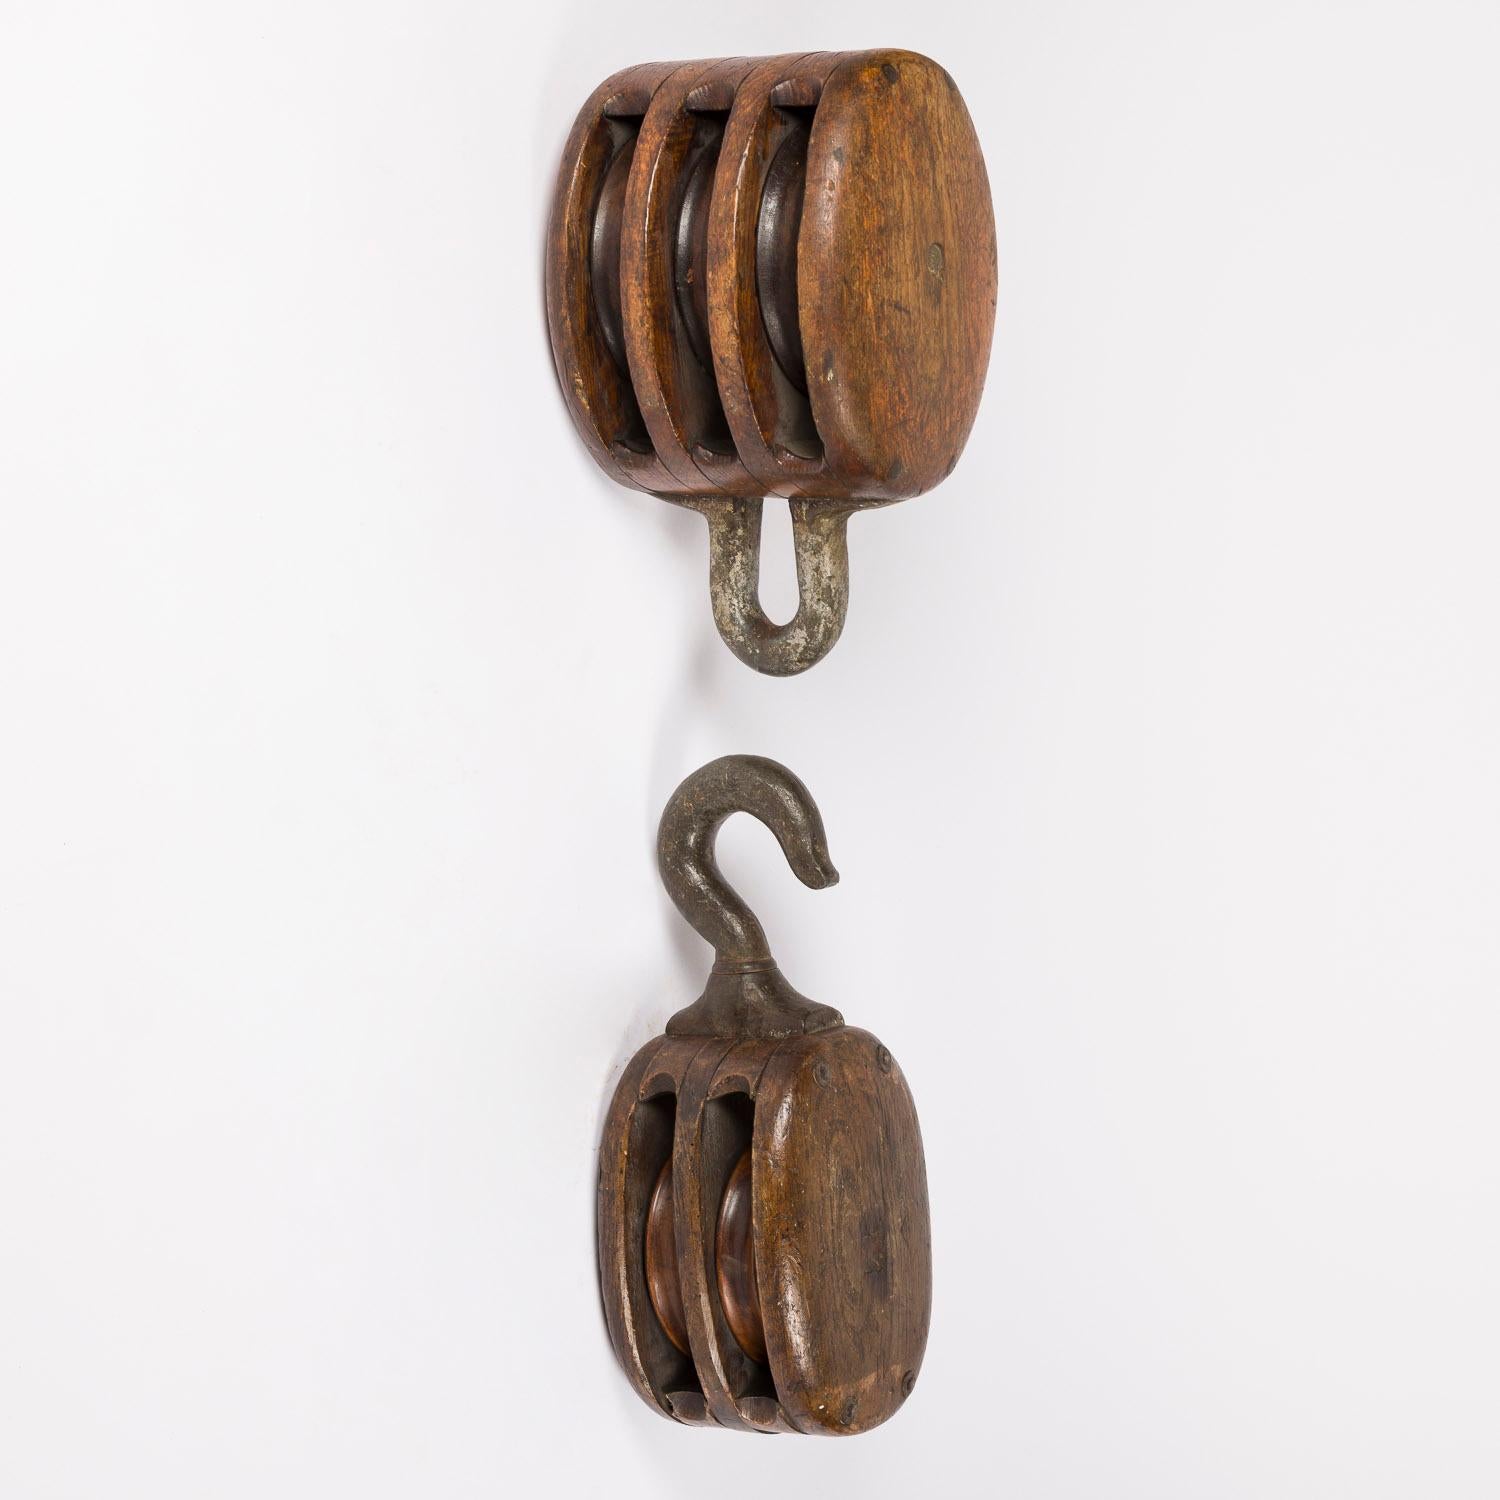 Three mid 19th century oak and iron Naval pulley blocks, used on sailing ships.

1: Double sheave tackle block with fixed eye. Height: 17 ½ inches.

2: Double sheave stiff swivel hook tackle block. Height: 20 inches.

3: Triple sheave tackle block.